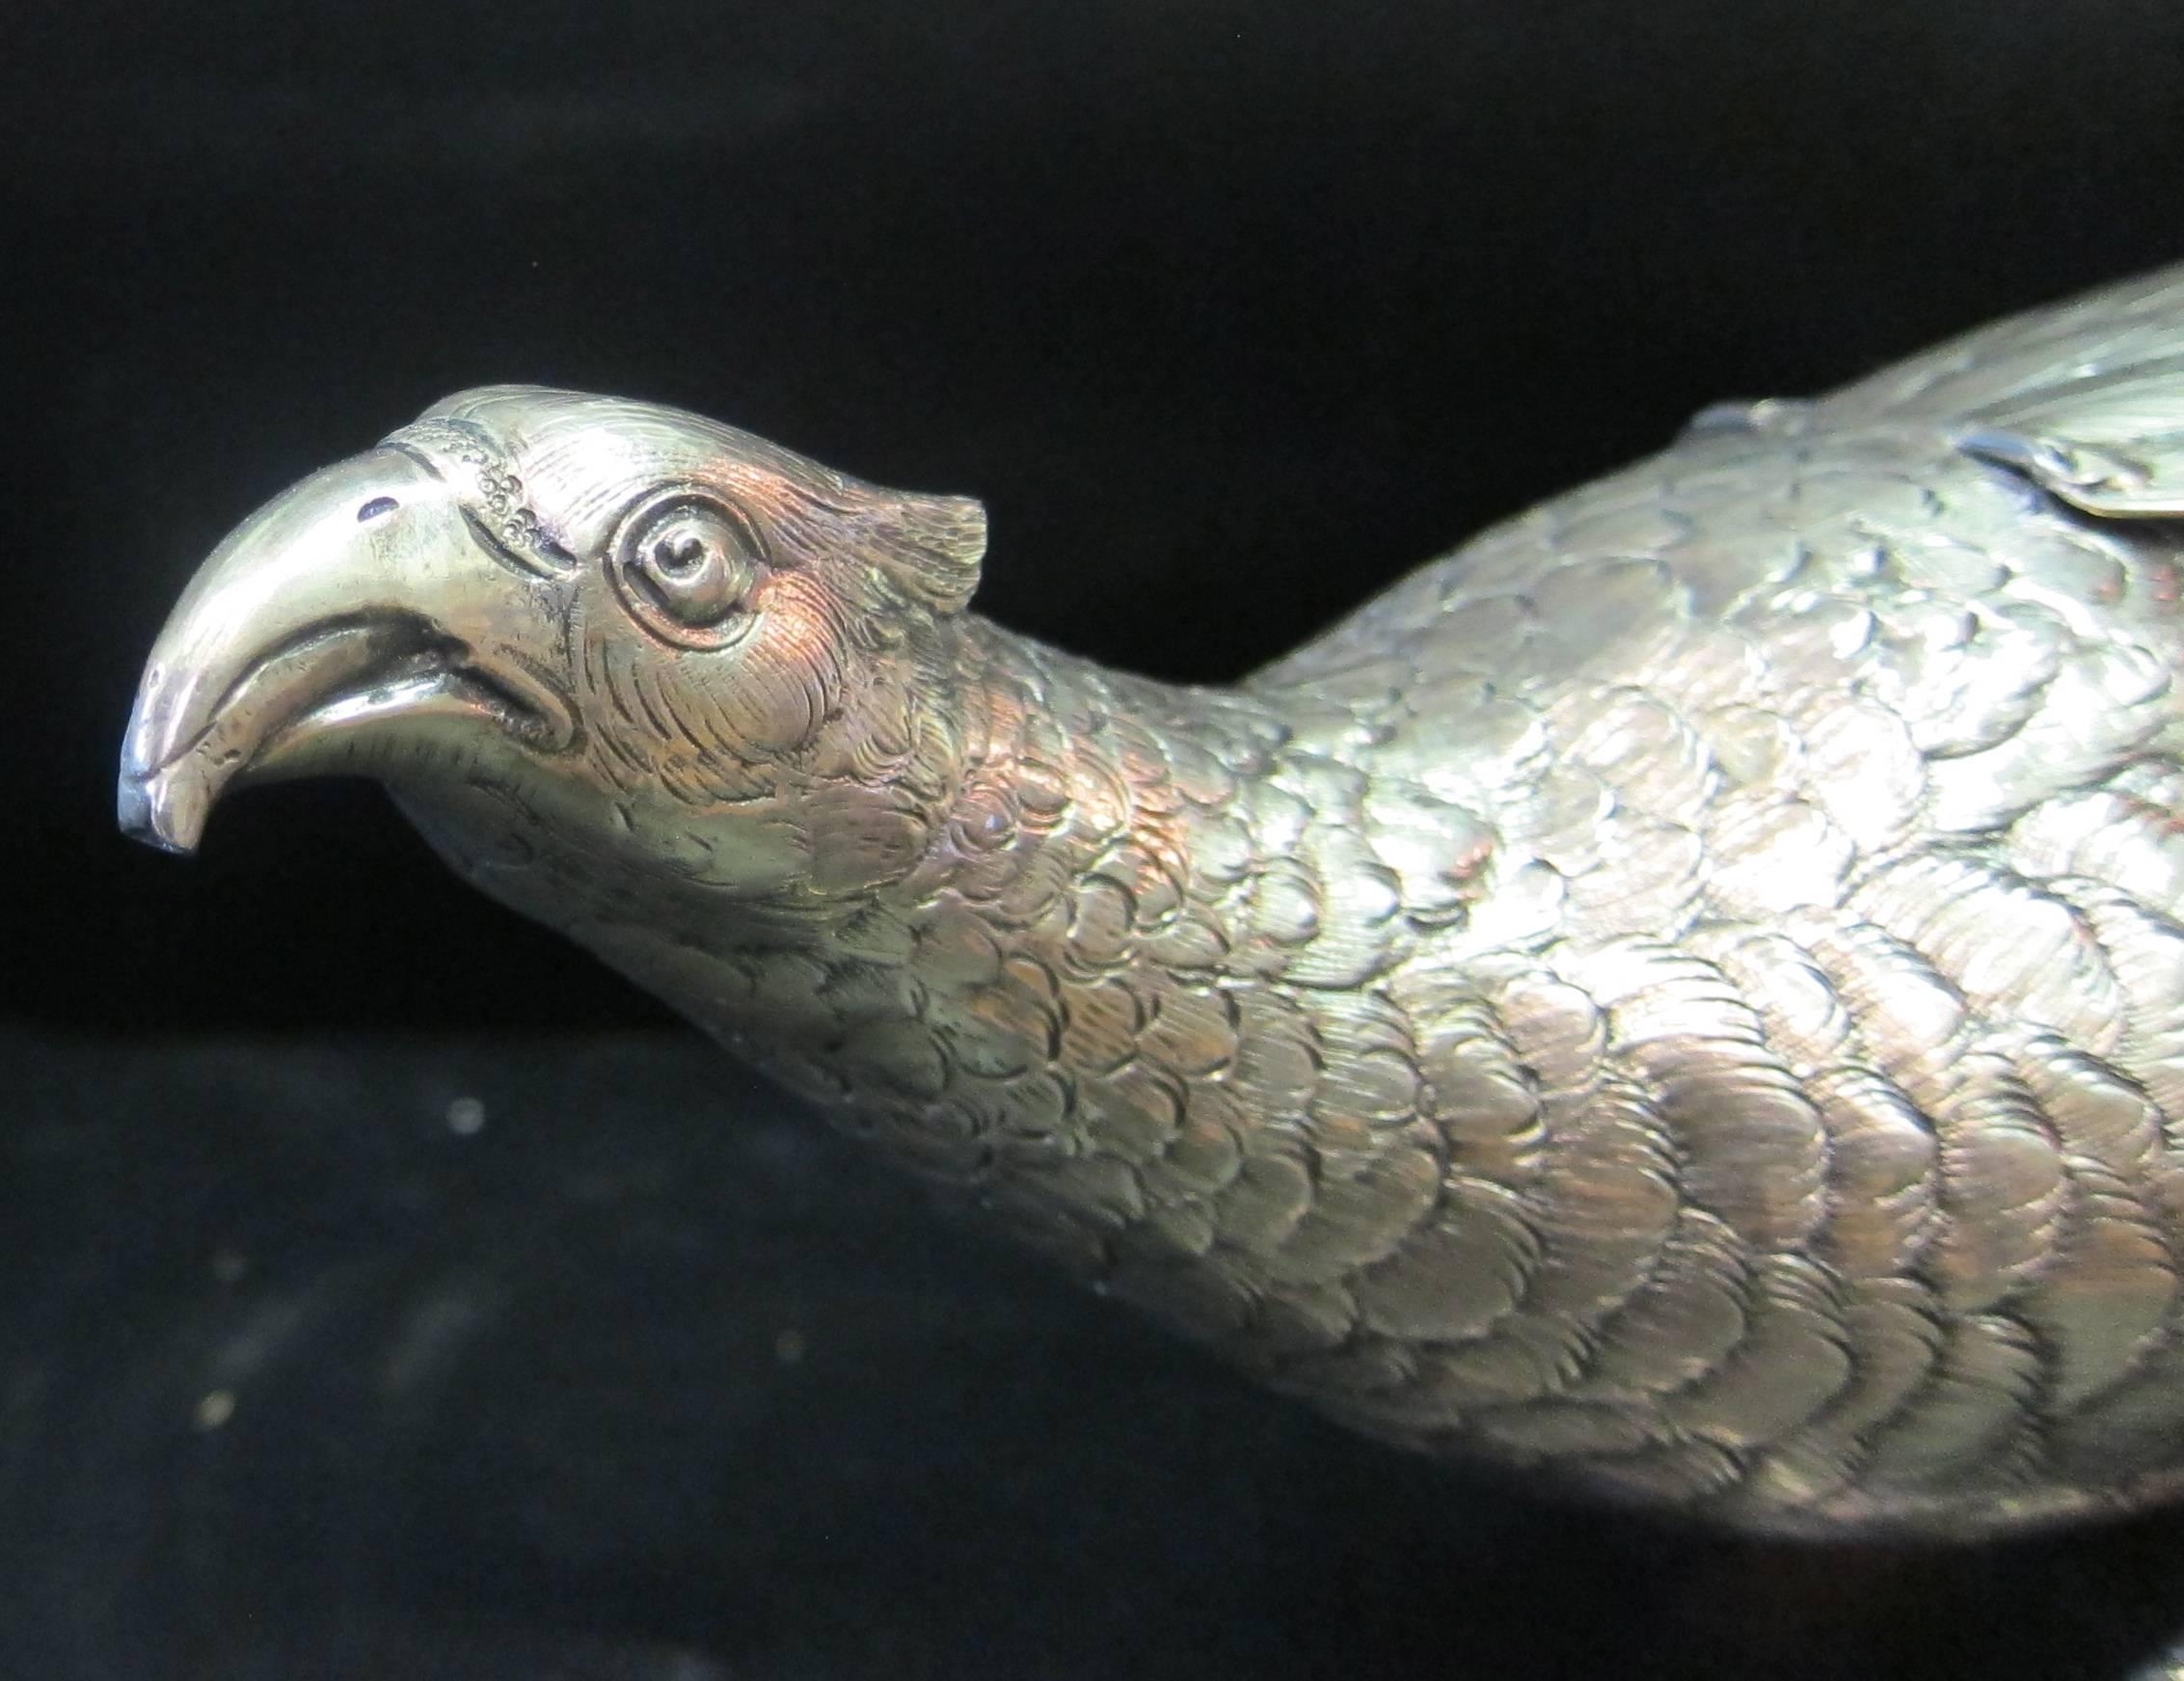 This vintage early 20th century sculpted pheasant figural liquor decanter is rendered in jeweler tested sterling silver & is extraordinary! Hidden beneath the pheasant's wing is the decanter's cap that unscrews for filling & the spout for pouring is